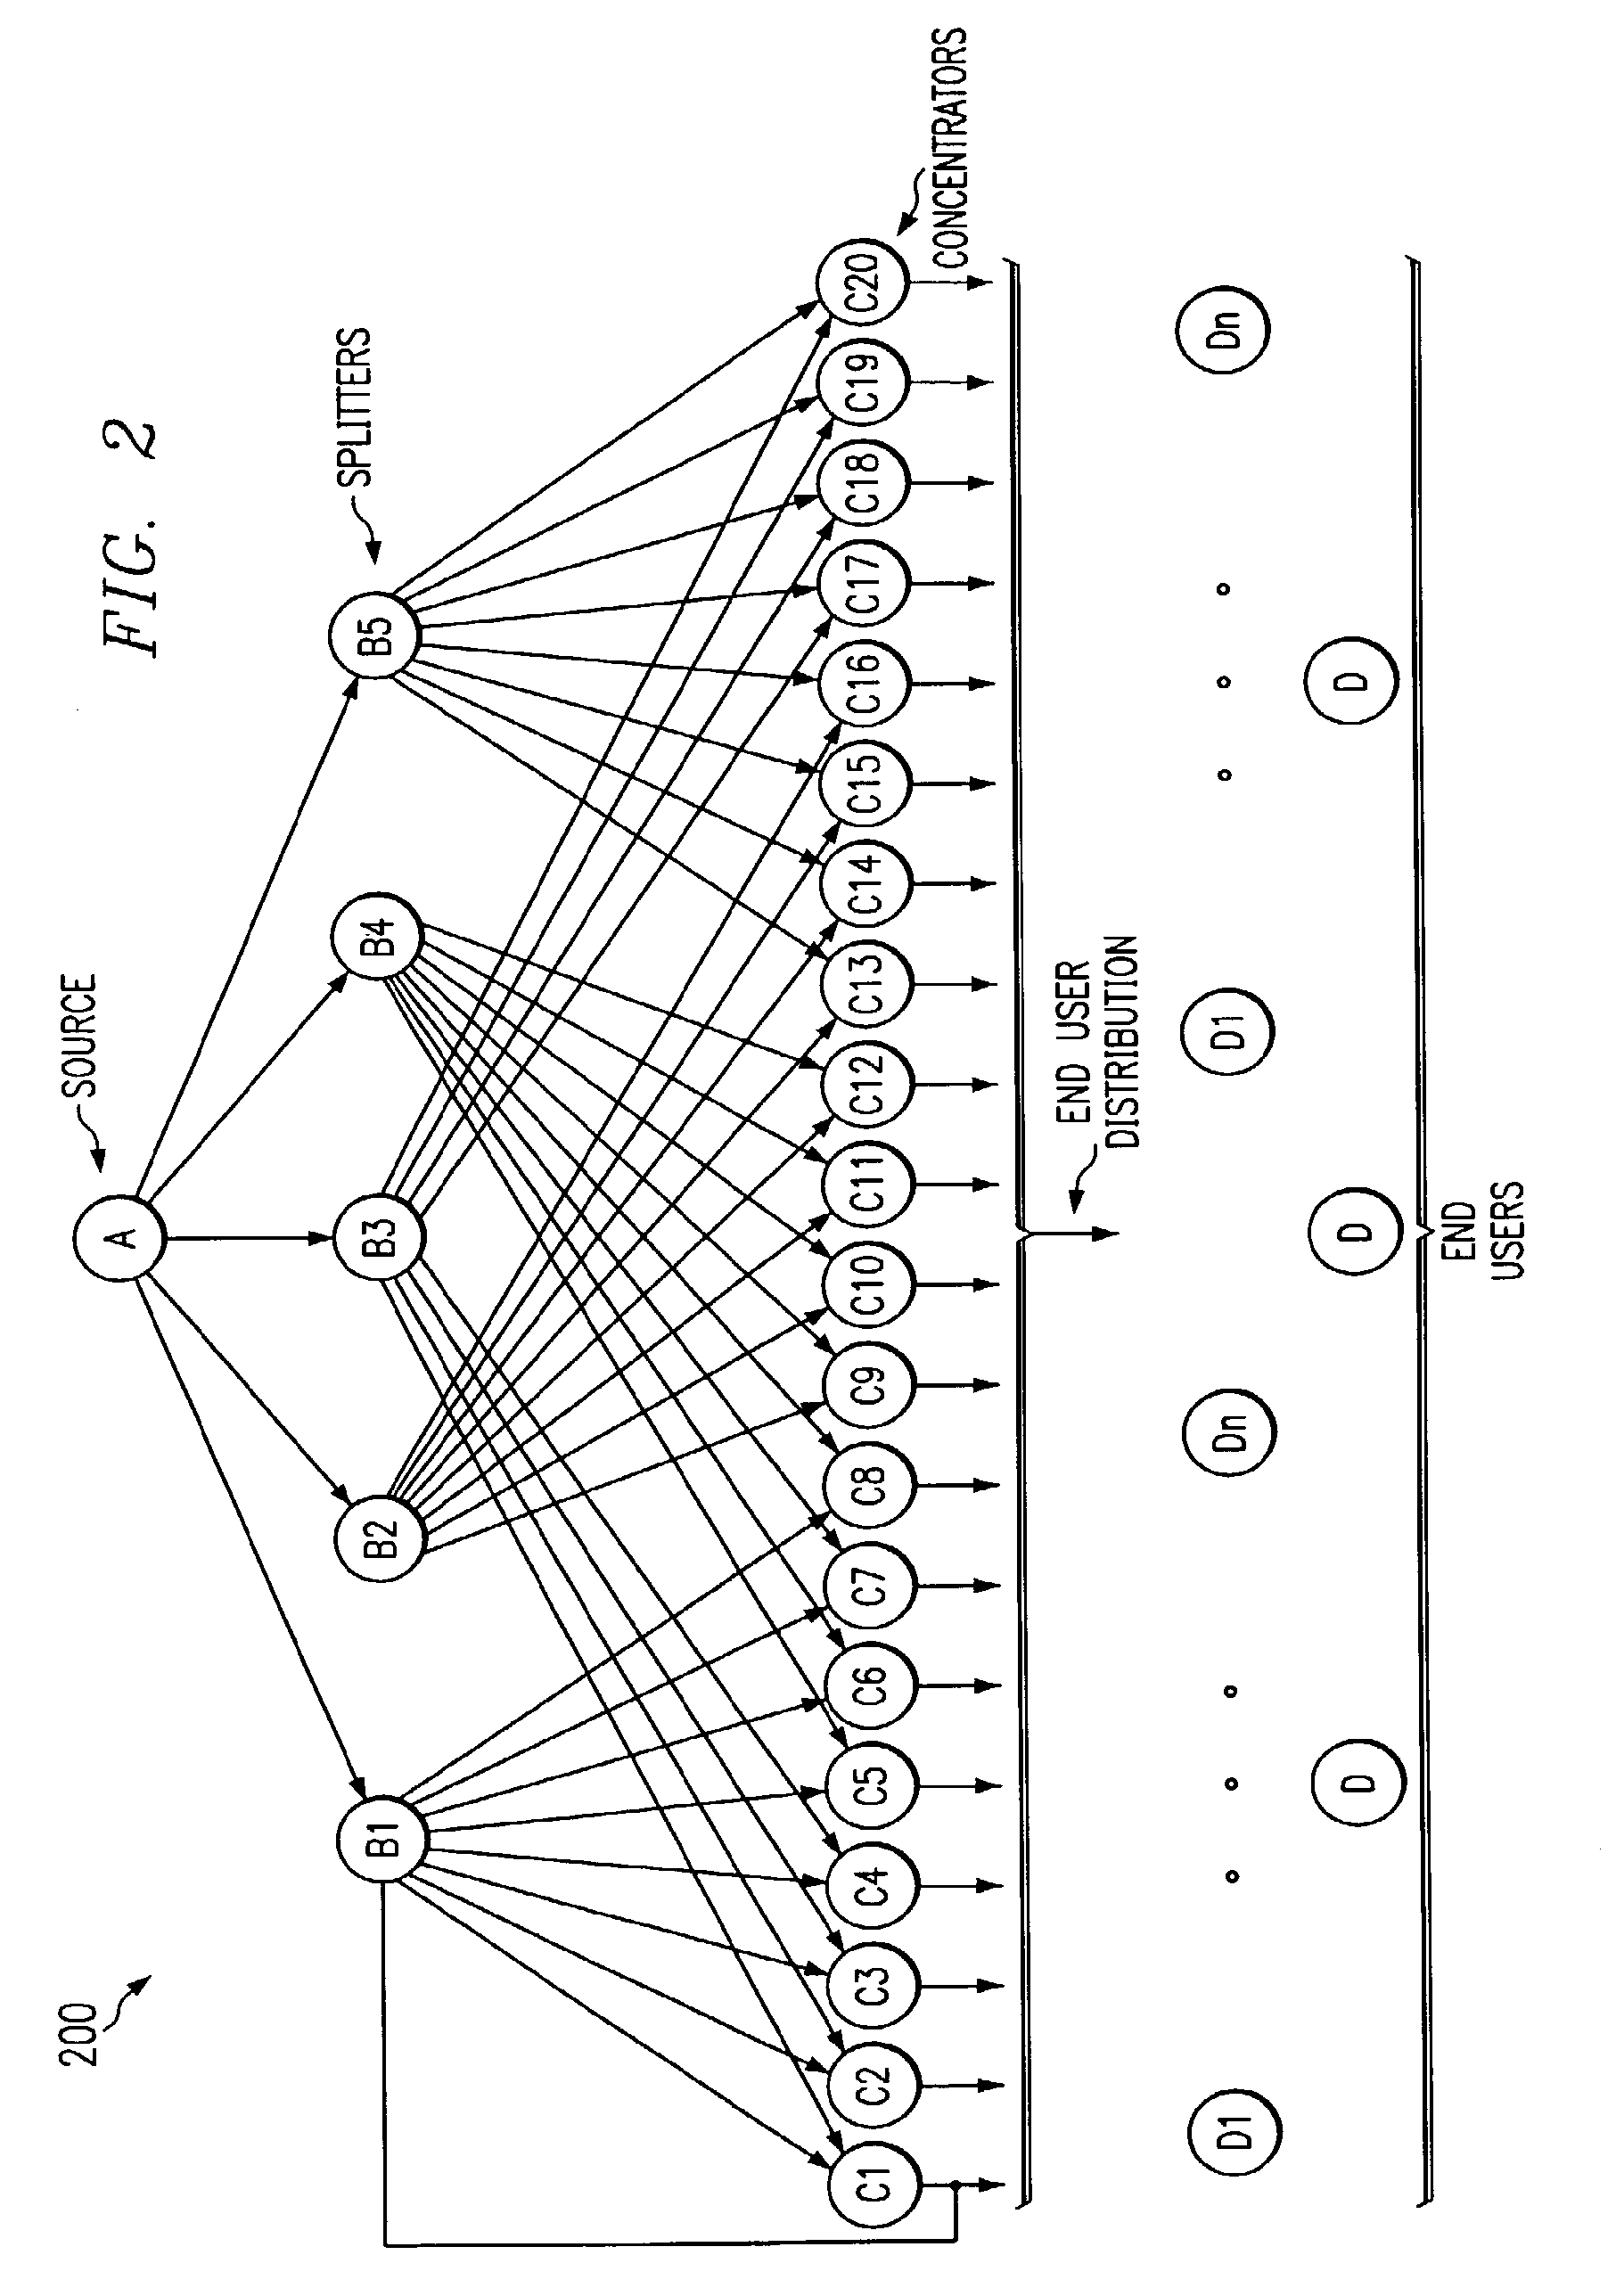 Method and system for fault tolerant media streaming over the Internet